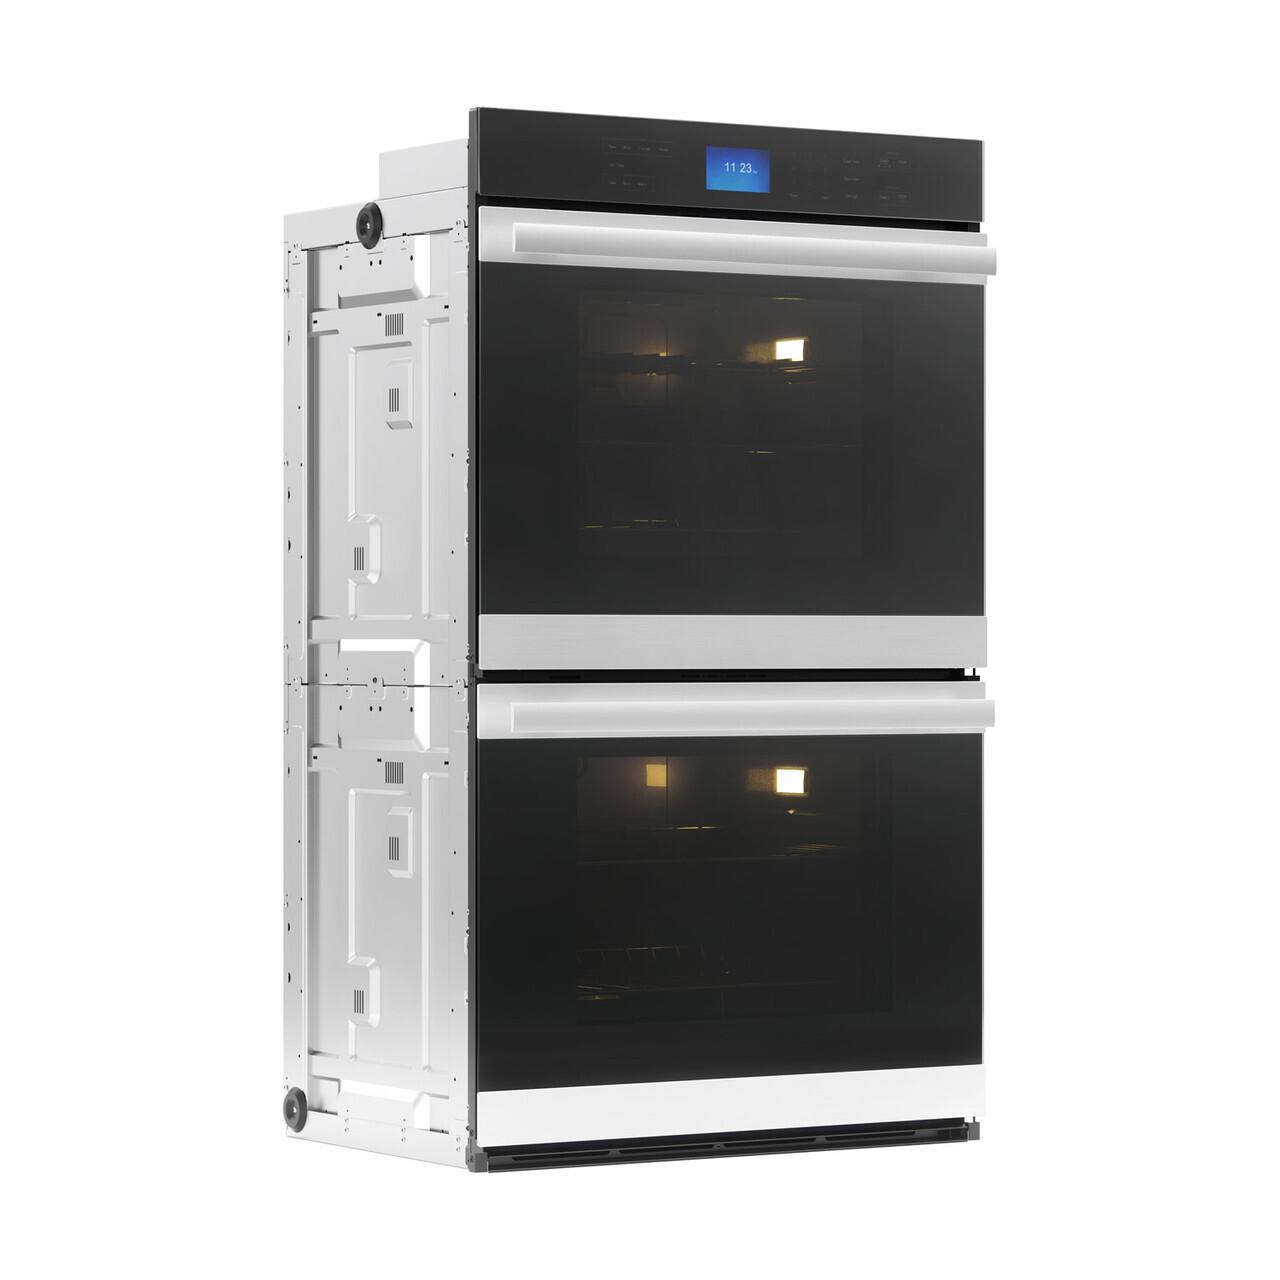 Sharp Built-In Double Wall Oven